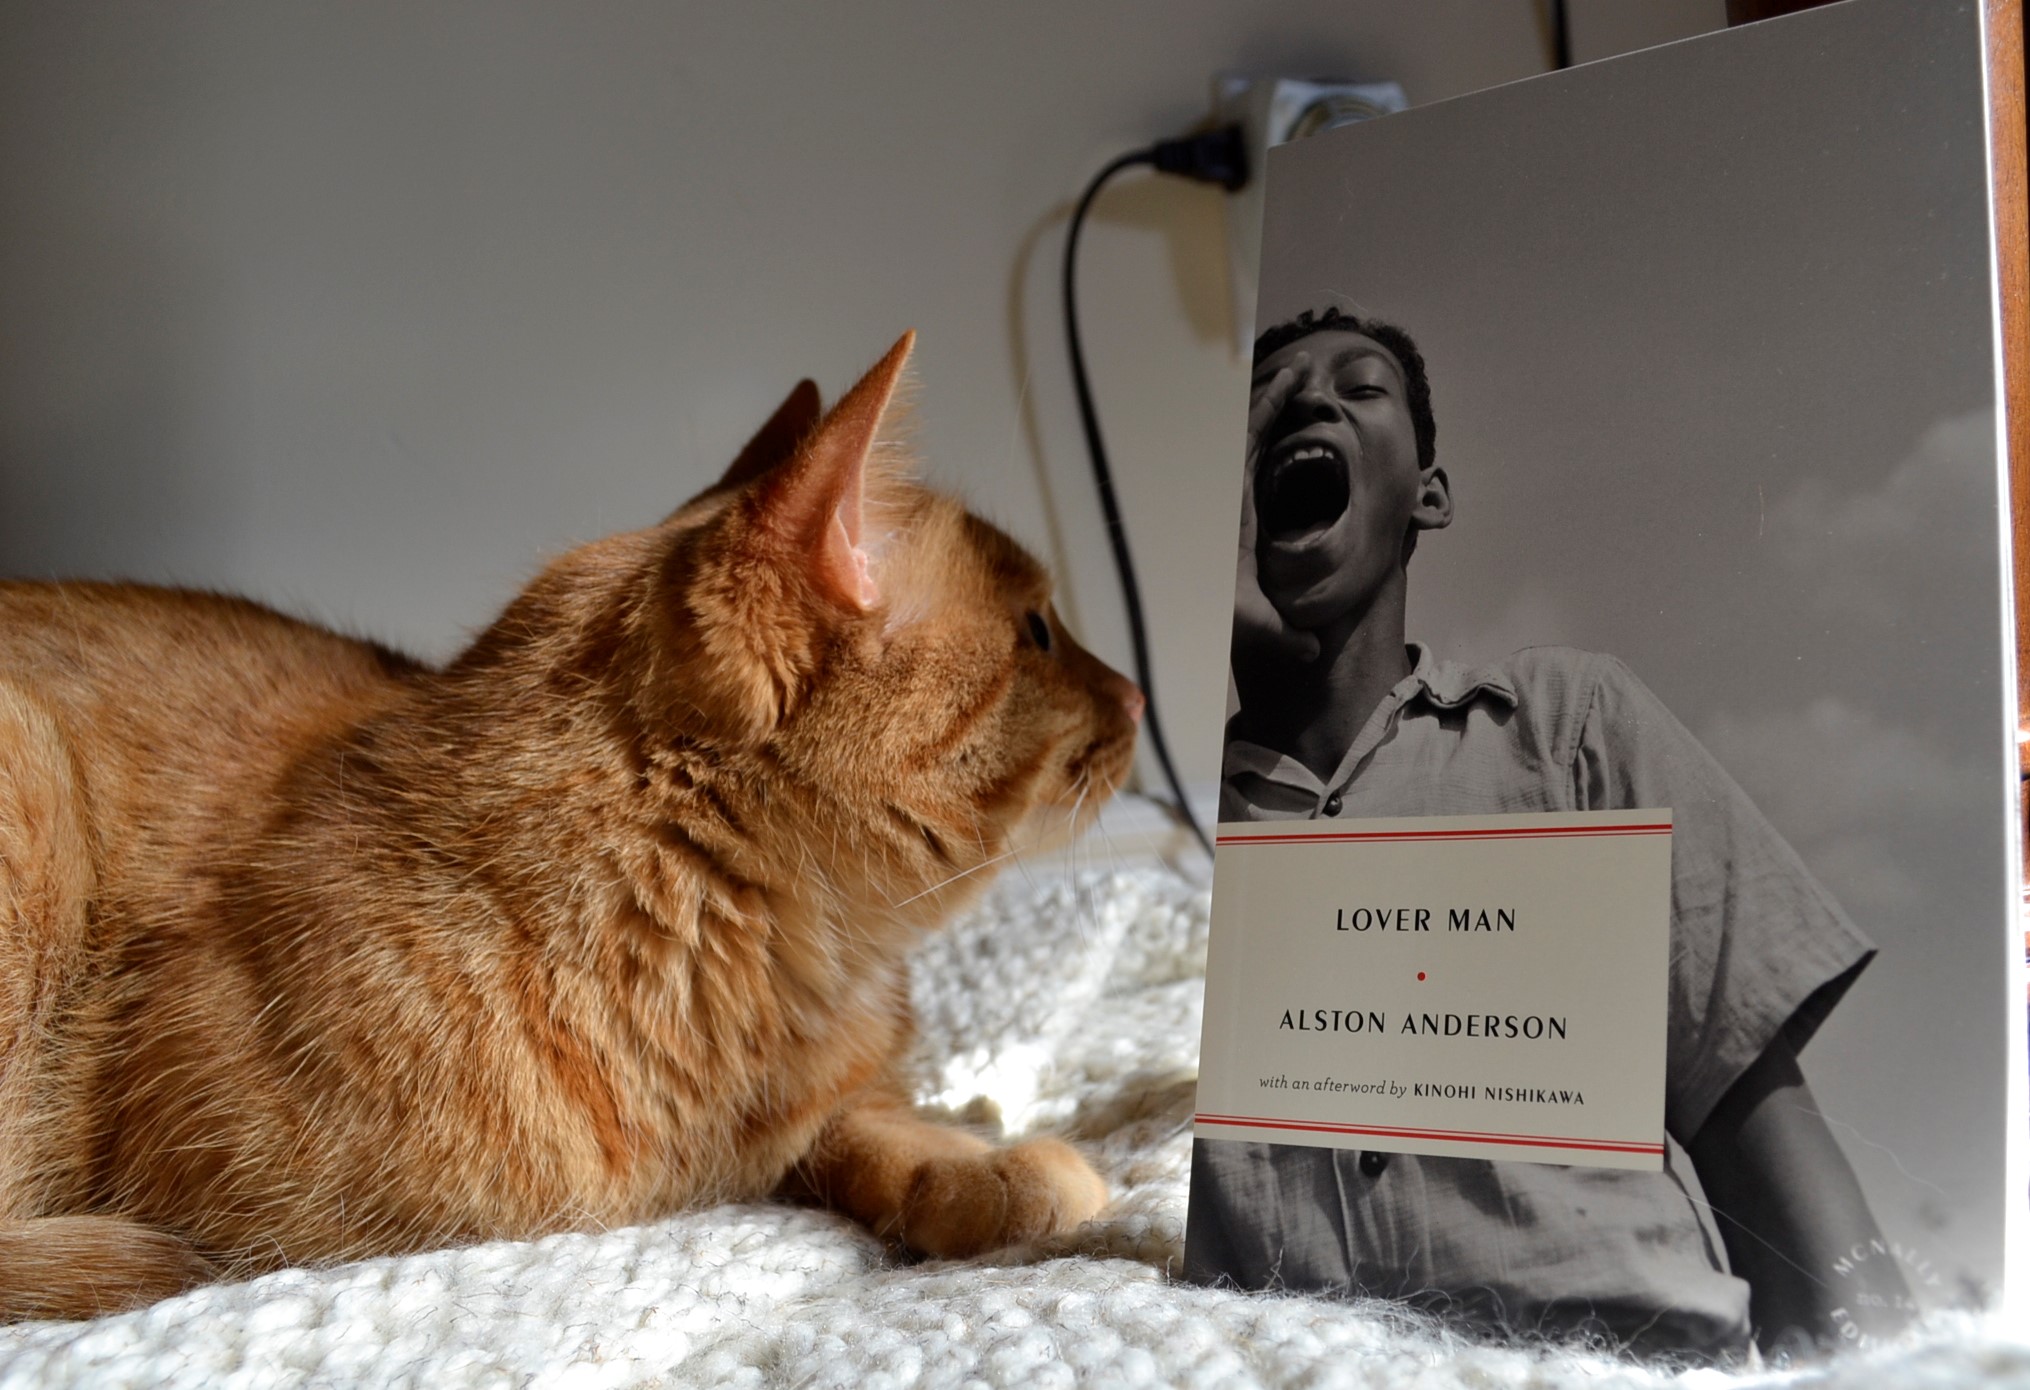 An orange tabby cat looks up at a copy of Alston Anderson's Lover Man.